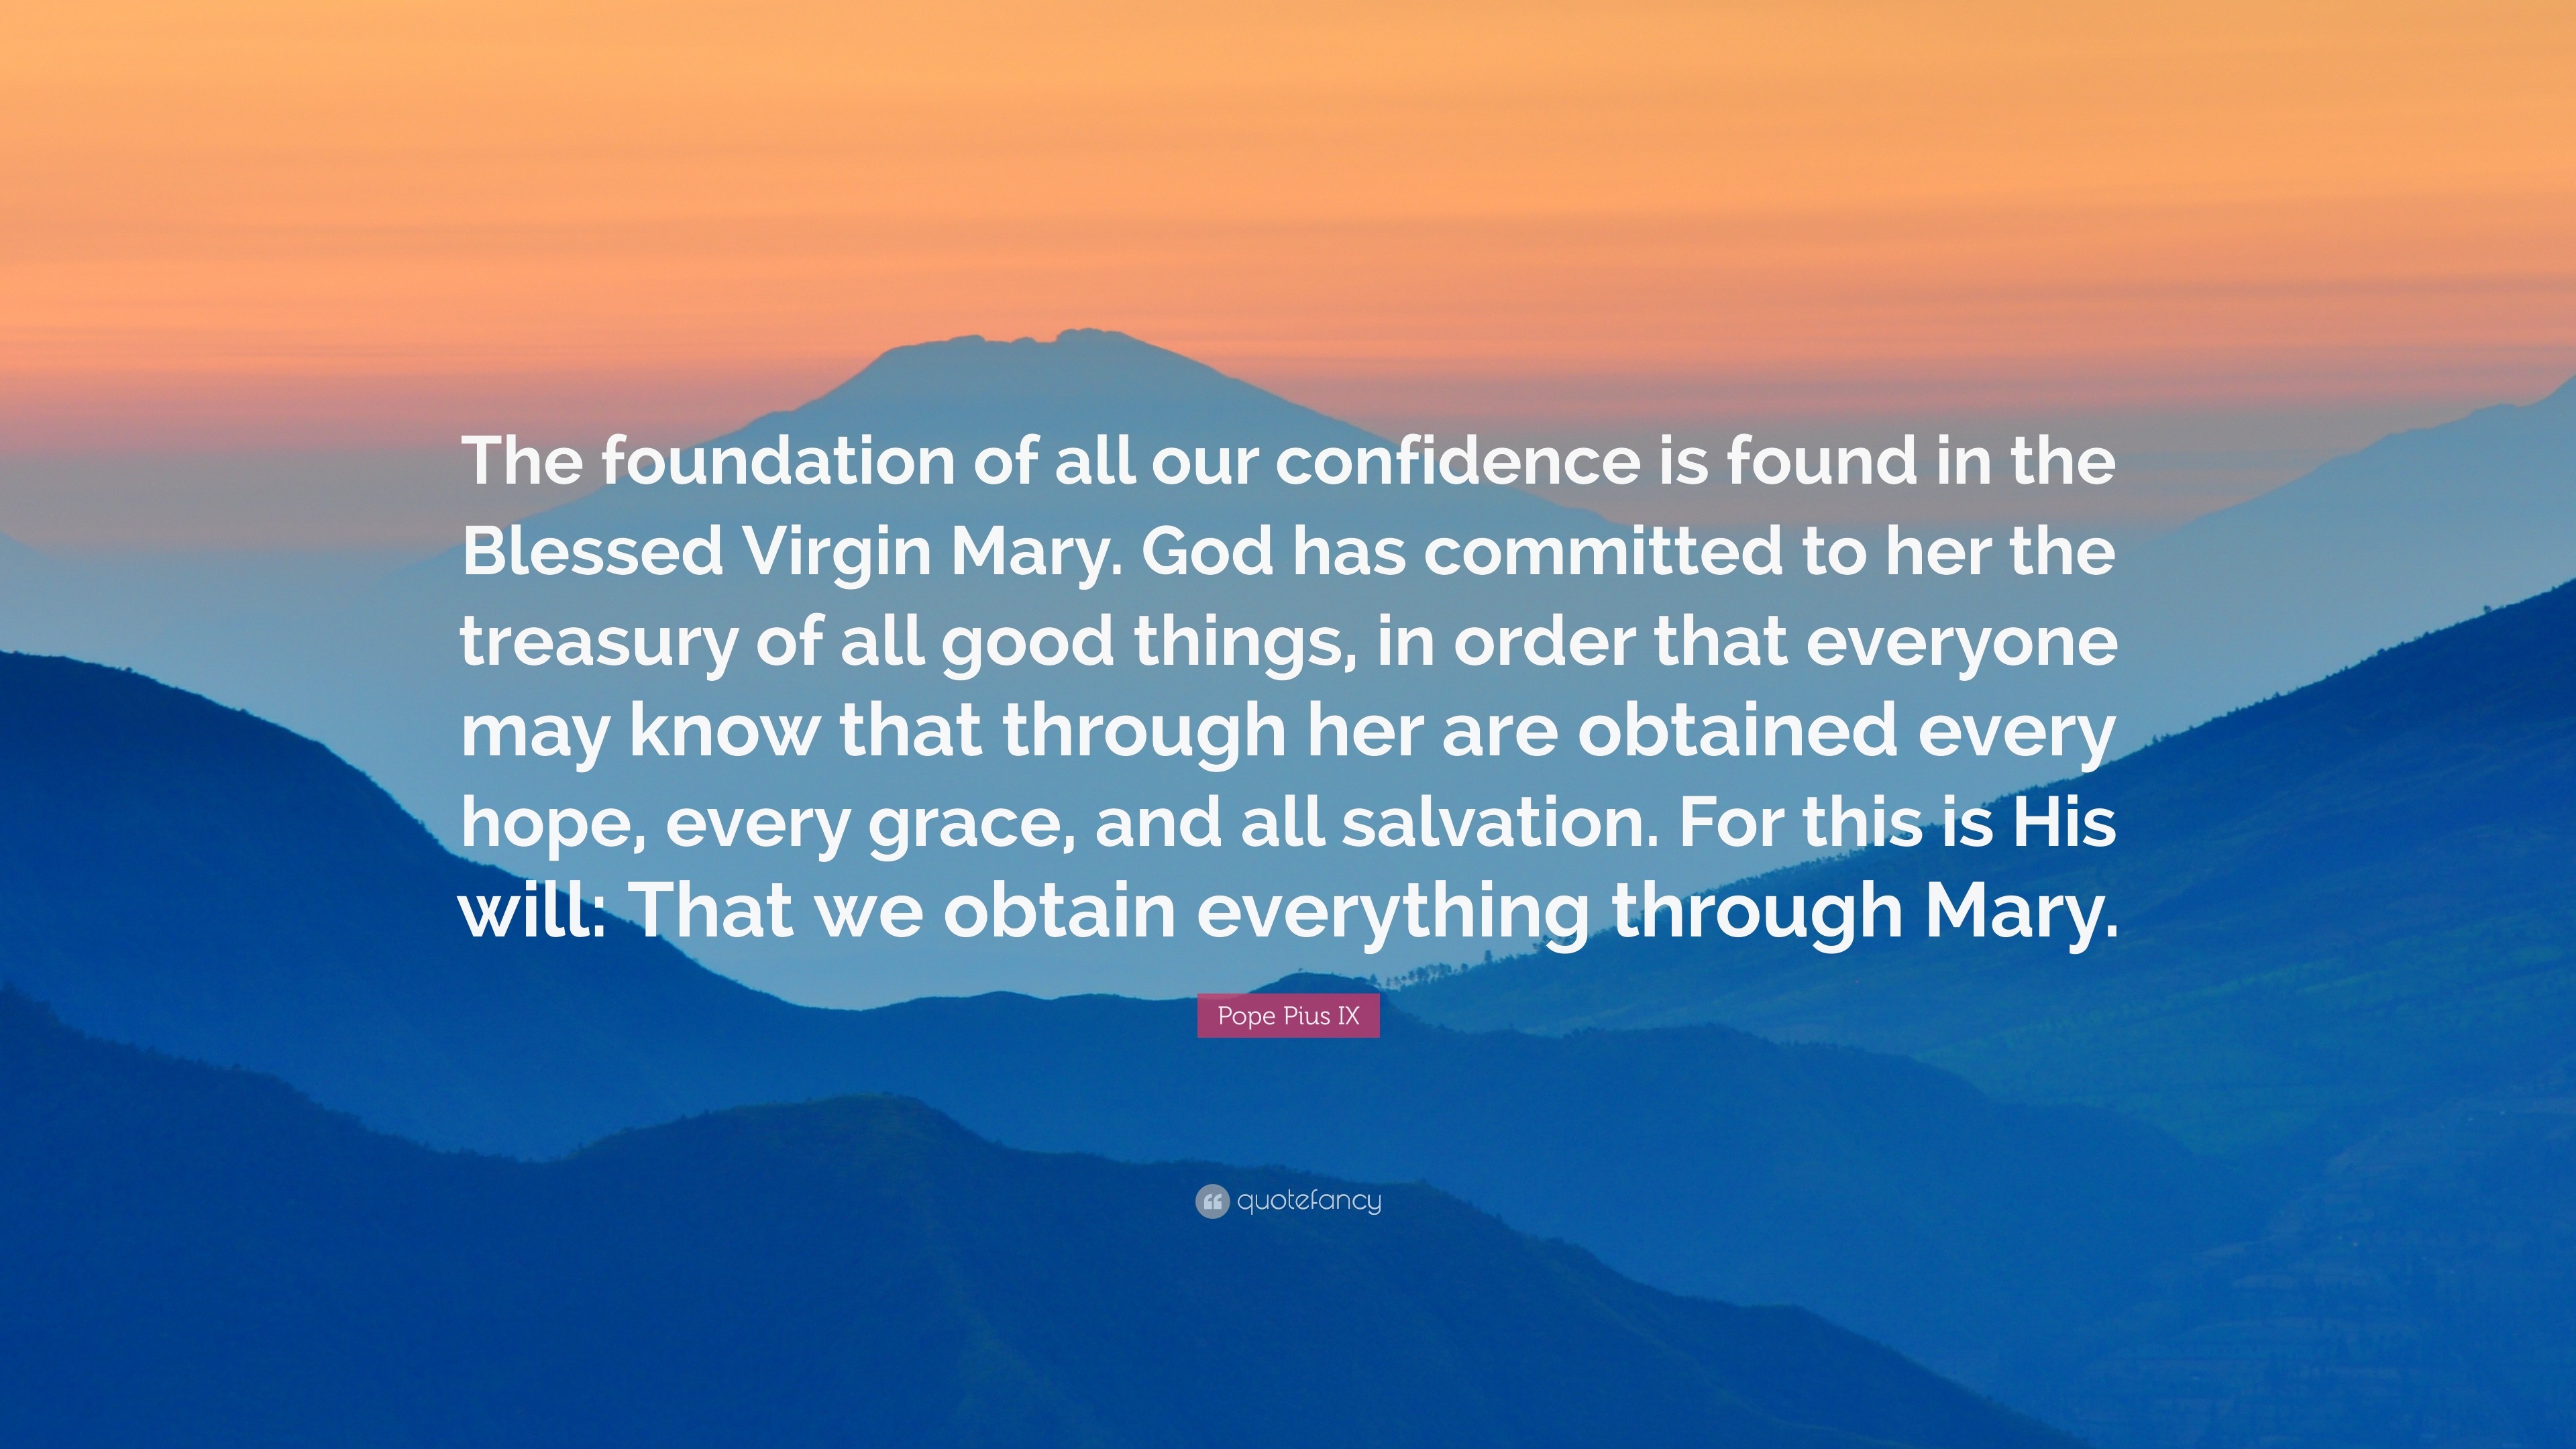 3840x2160 Pope Pius IX Quote: “The foundation of all our confidence is found in the